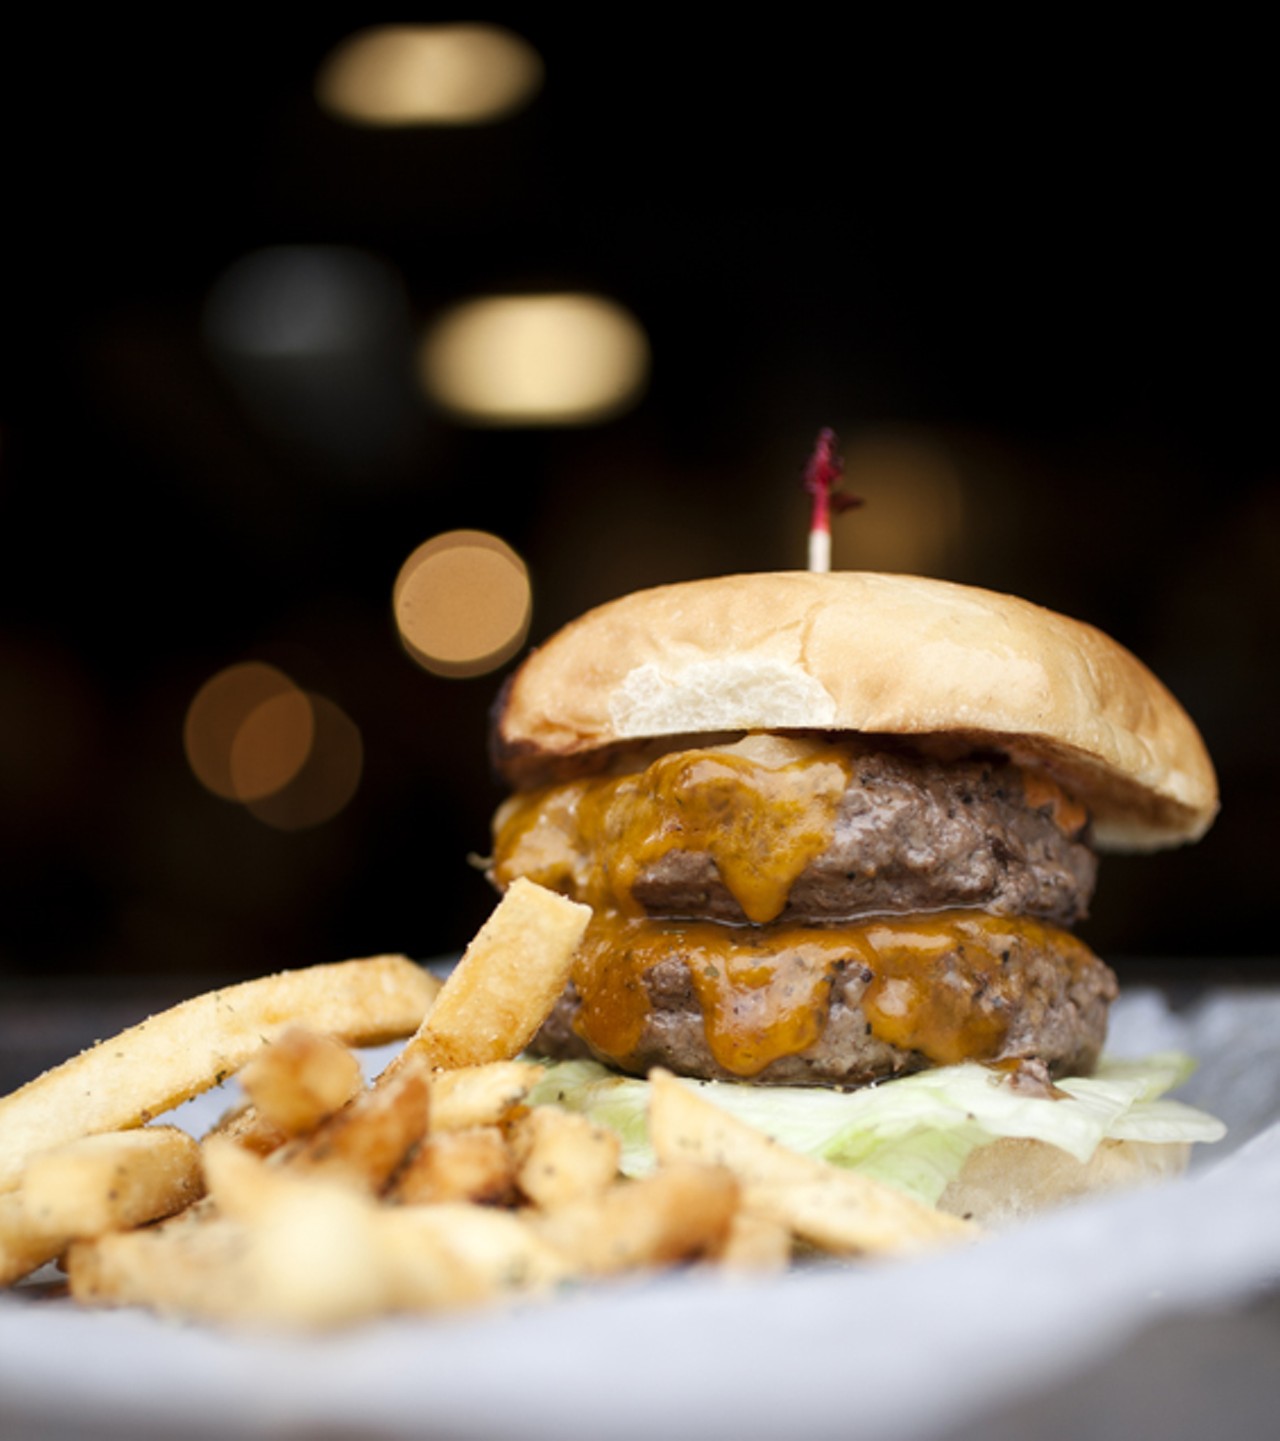 THE Cheeseburger (as if is called on the menu) can be ordered as a single or a double. Here, a double is pictured.